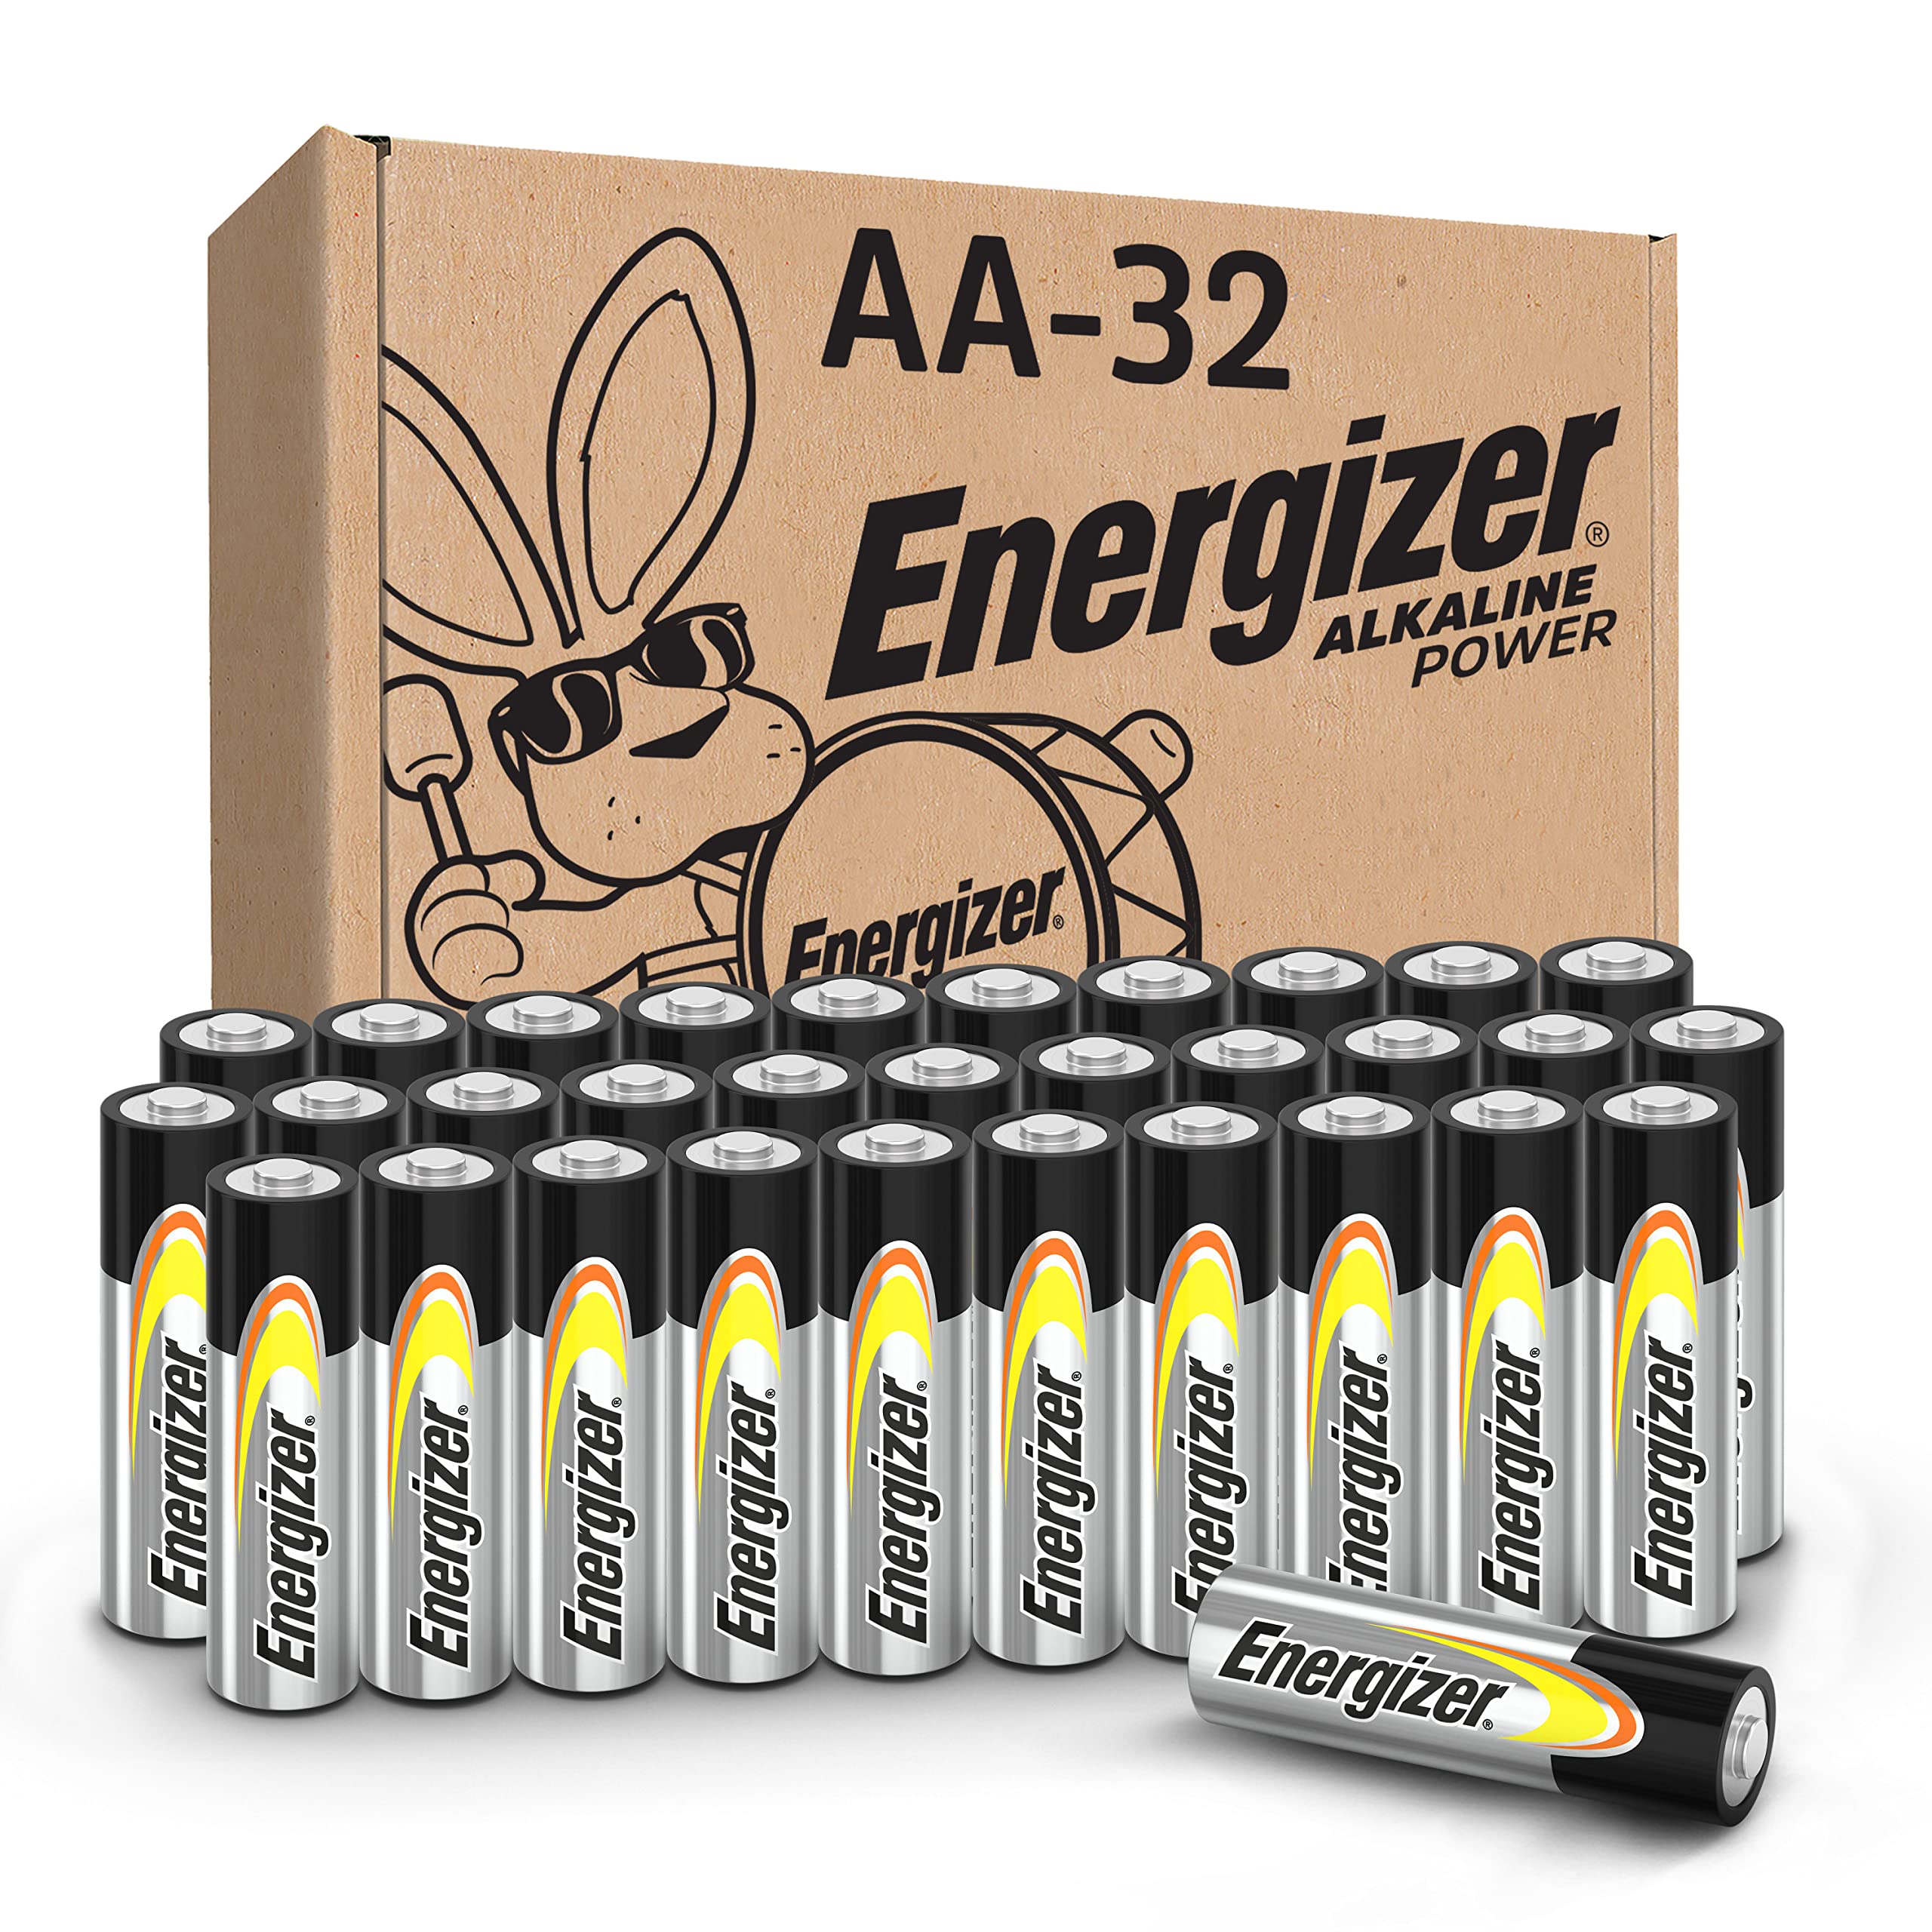 Energizer Alkaline Batteries: 32-Count AA Batteries $15.05 ($0.47 each) w/ S&S, 32-Count AAA Batteries $12.80 ($0.40 each) w/ S&S + Free Shipping w/ Prime or on $35+